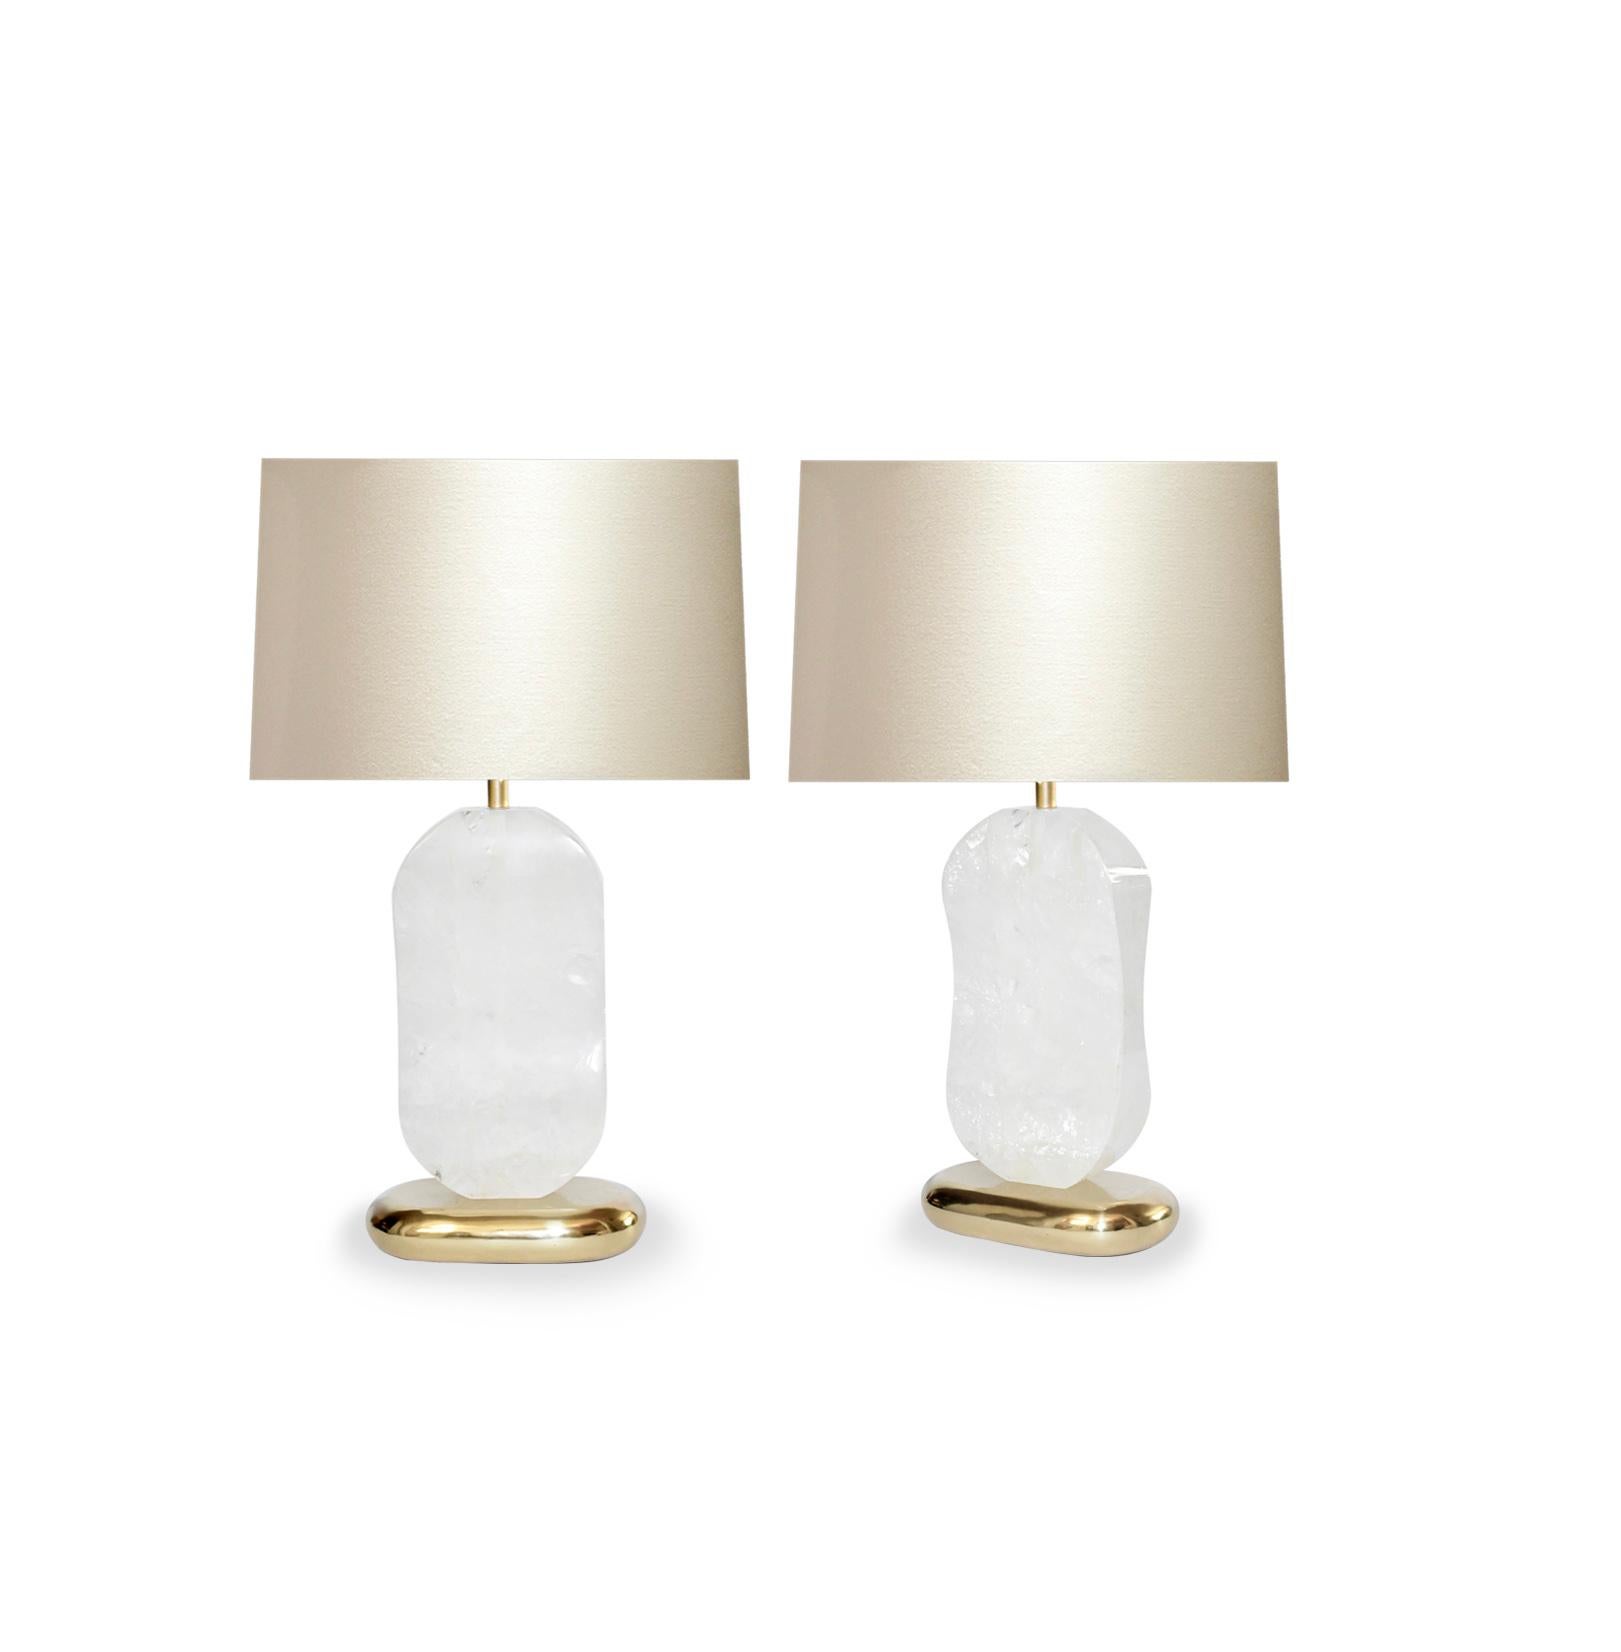 Pair of carved oval form rock crystal quartz lamps with polished brass bases. Created by Phoenix Gallery, NYC.
Measure: To the top of rock crystal: 14.35